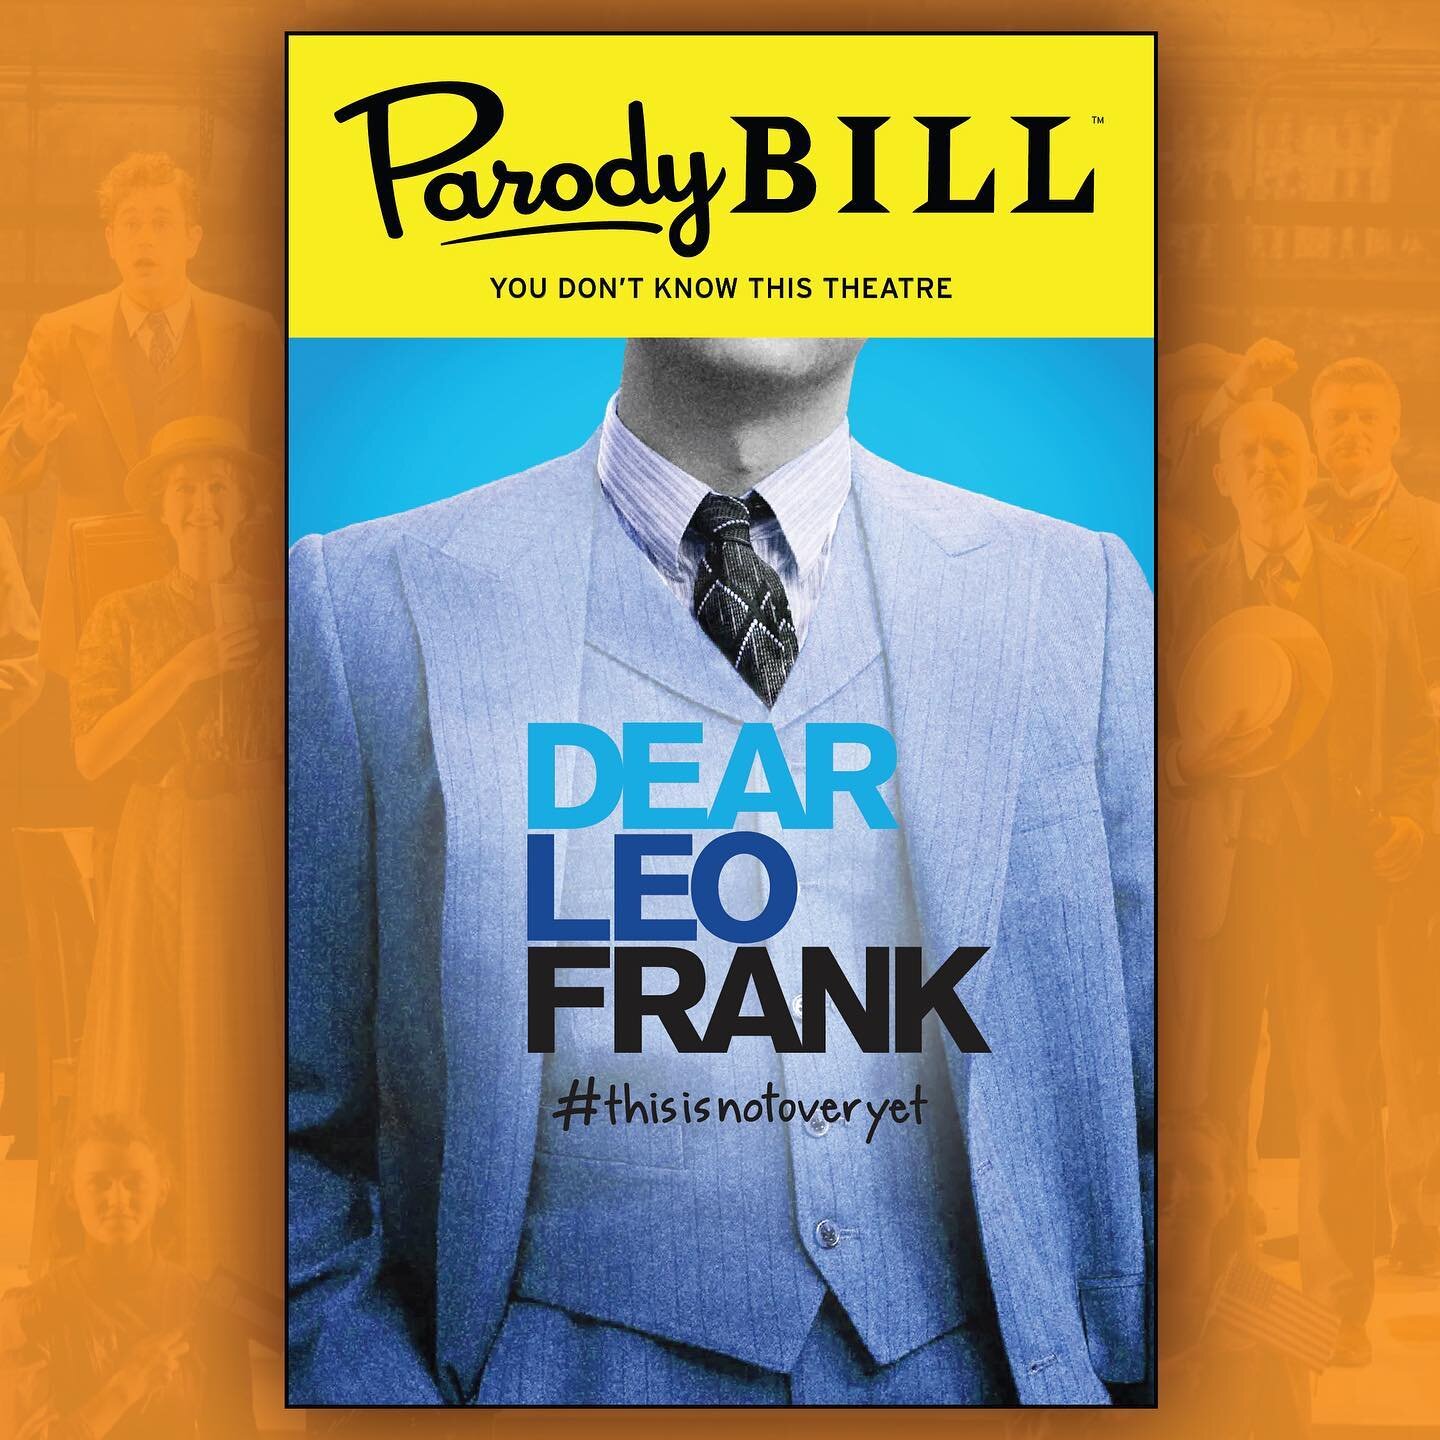 Dear Leo Frank #ThisIsNotOverYet

We&rsquo;re counting down to @TheTonyAwards with all-new @Parodybill mashups inspired by the poster art from this season&rsquo;s musicals. 🏆🎭

&ldquo;Dear Leo Frank&rdquo; is a mashup of @ParadeBway with (you guess